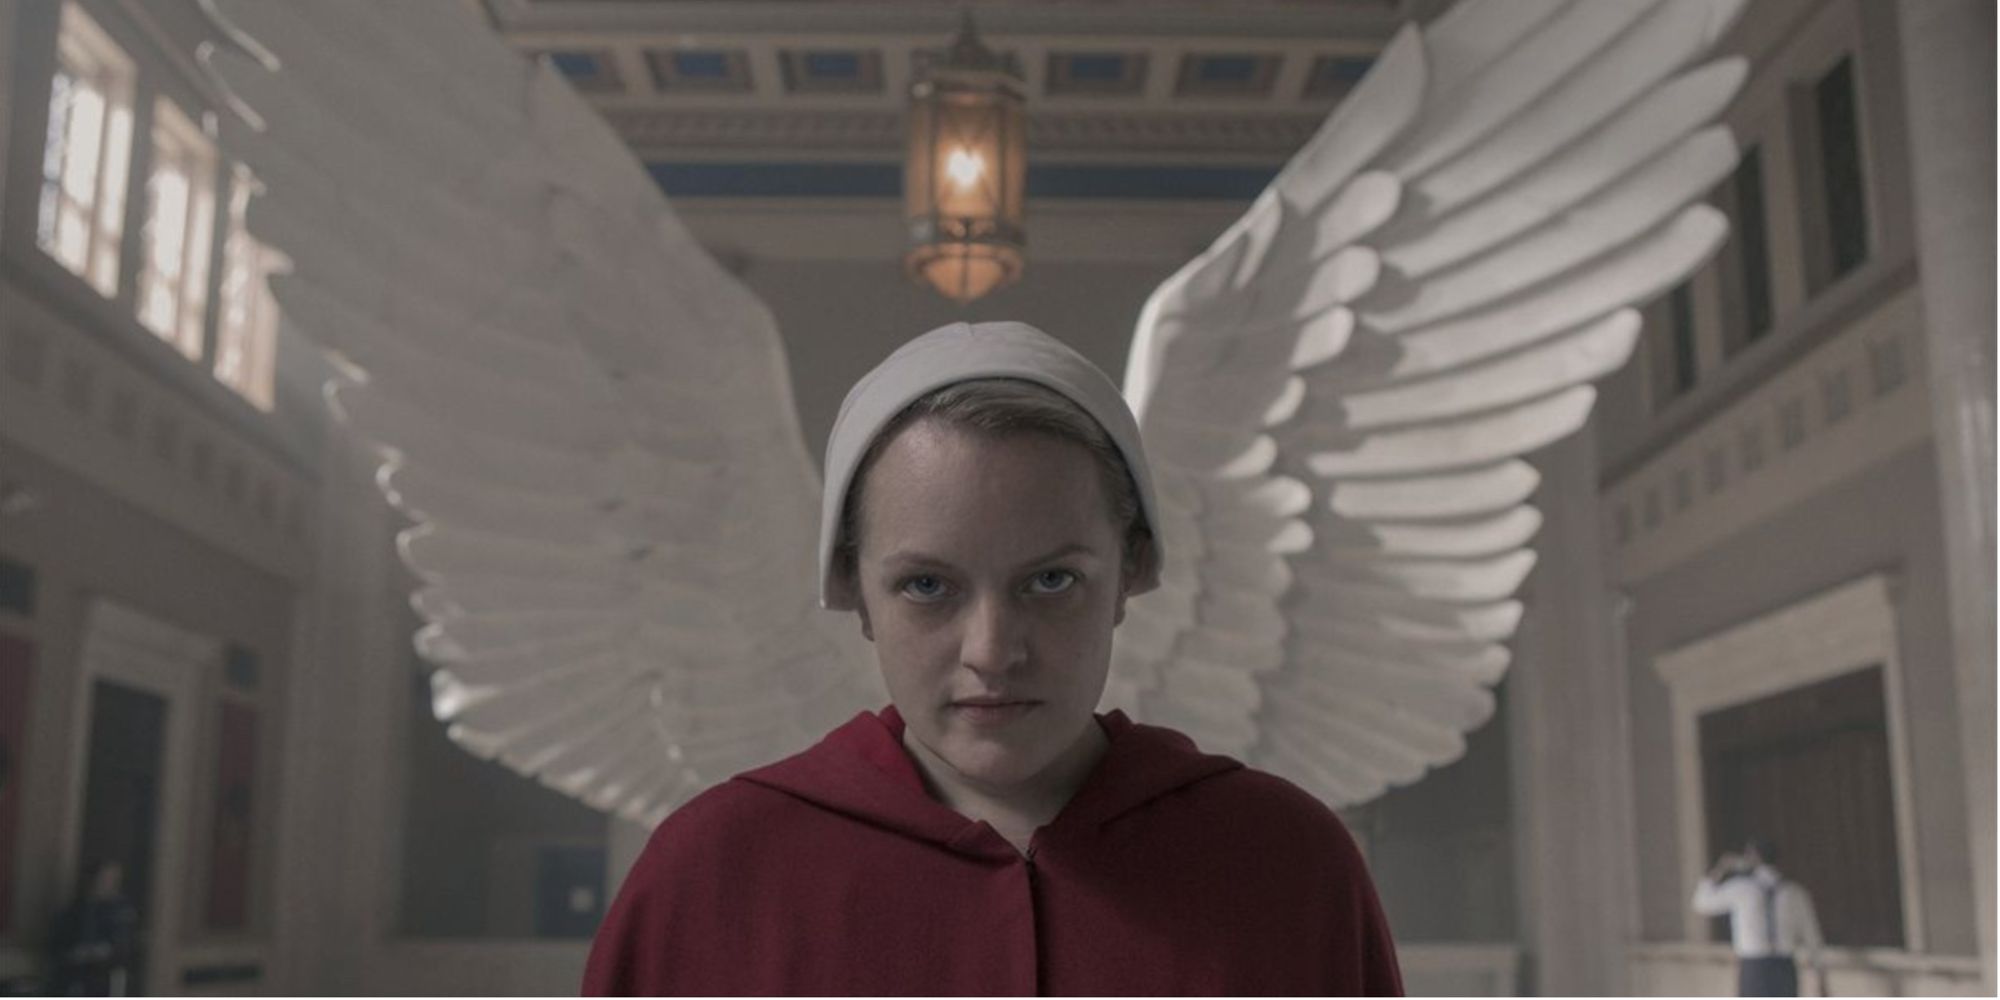 Offred looking at the camera with wings behind her head